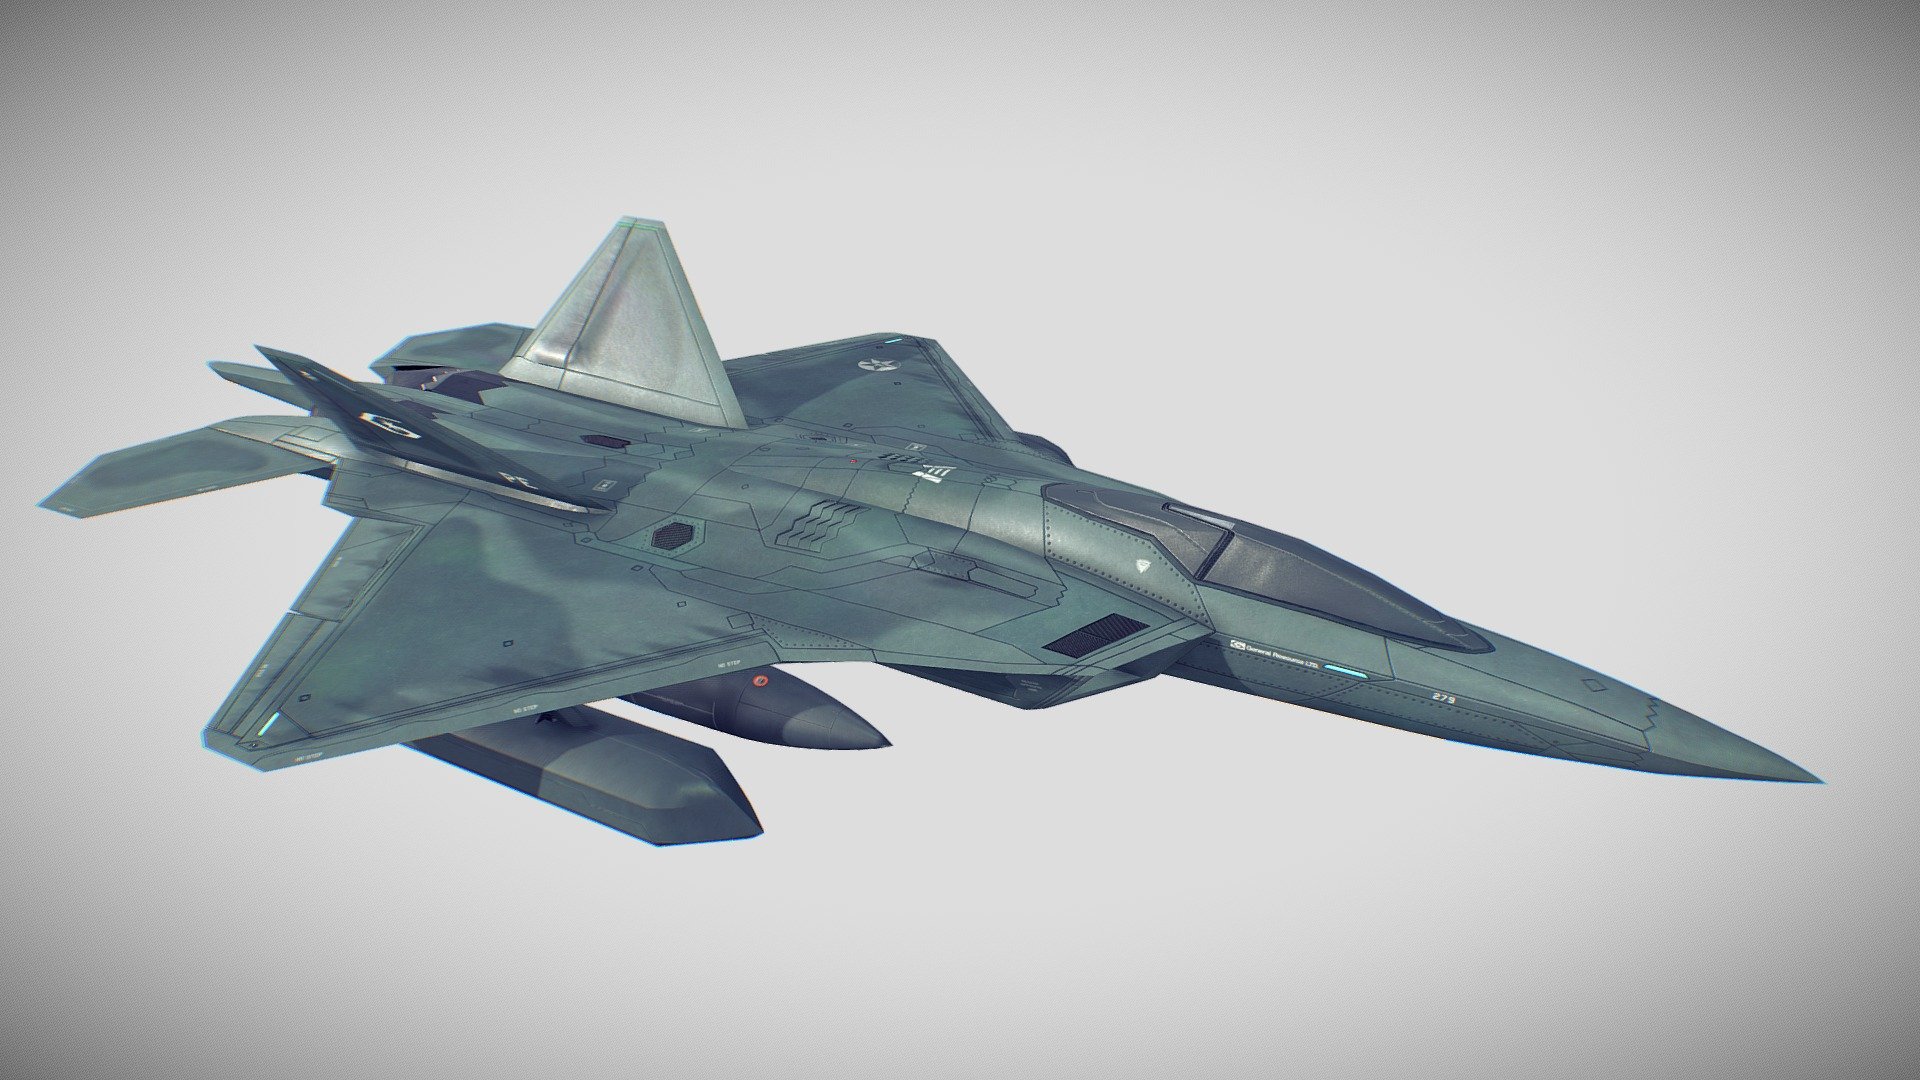 F-22C Raptor II, based on a concept art for a certain sci-fi/cyberpunk flight arcade game by Kei Yoshimizu.

It incorporates elements of the real life F-22 Raptor and YF-23 Black Widow. The final version in the source material looks too much like the former, despite being set in the GitS-like future, hence basing this on the more radical approach from the concept art.

Animated and fully textured 3d model